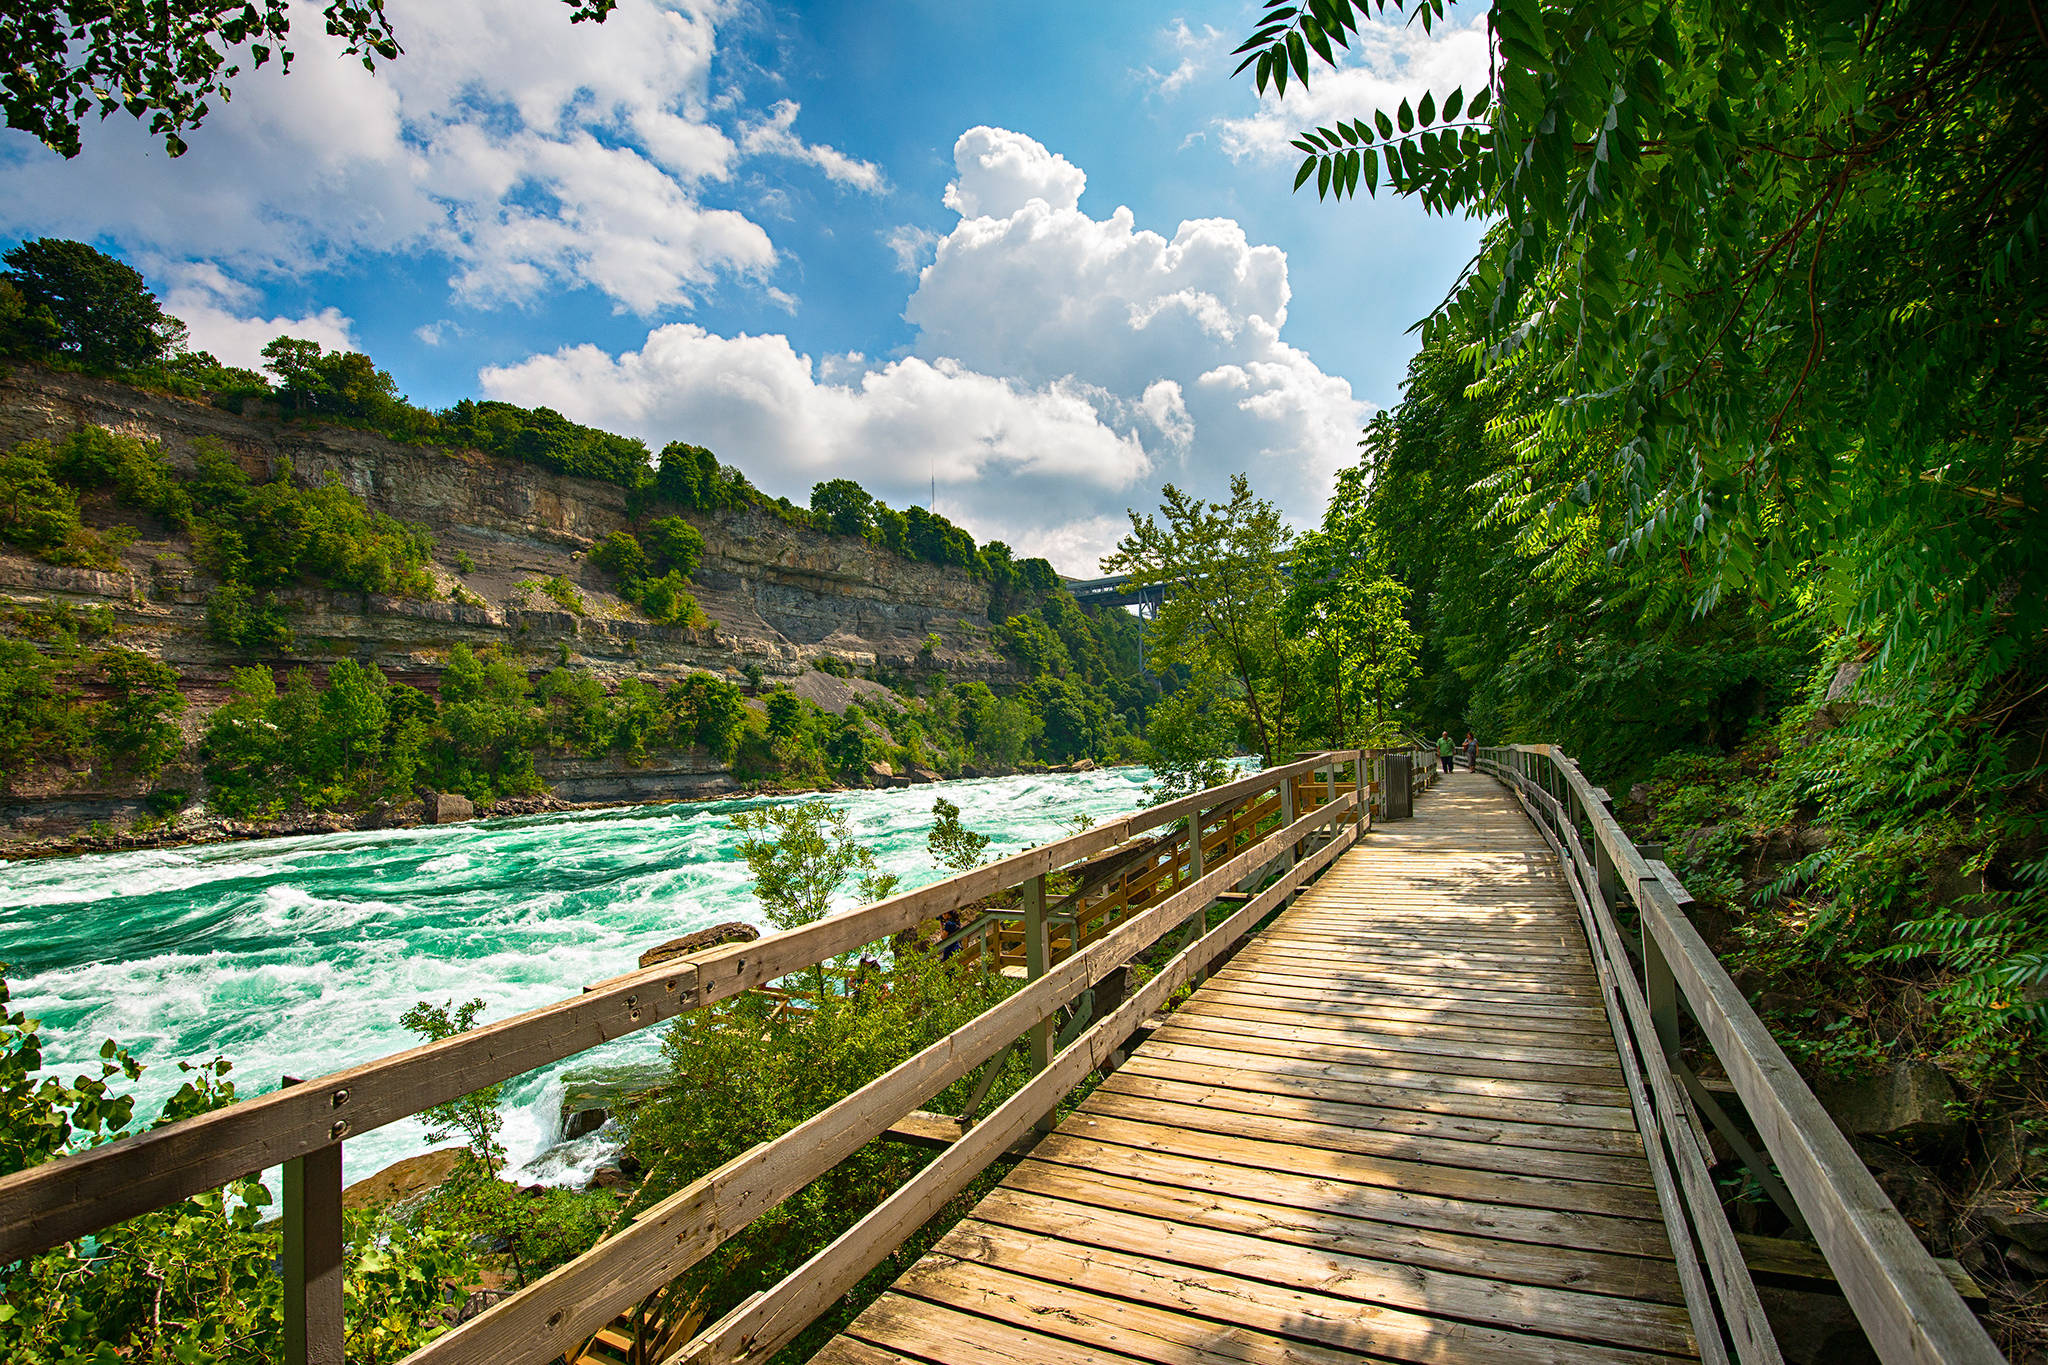 This incredible boardwalk is just an hour away from Toronto